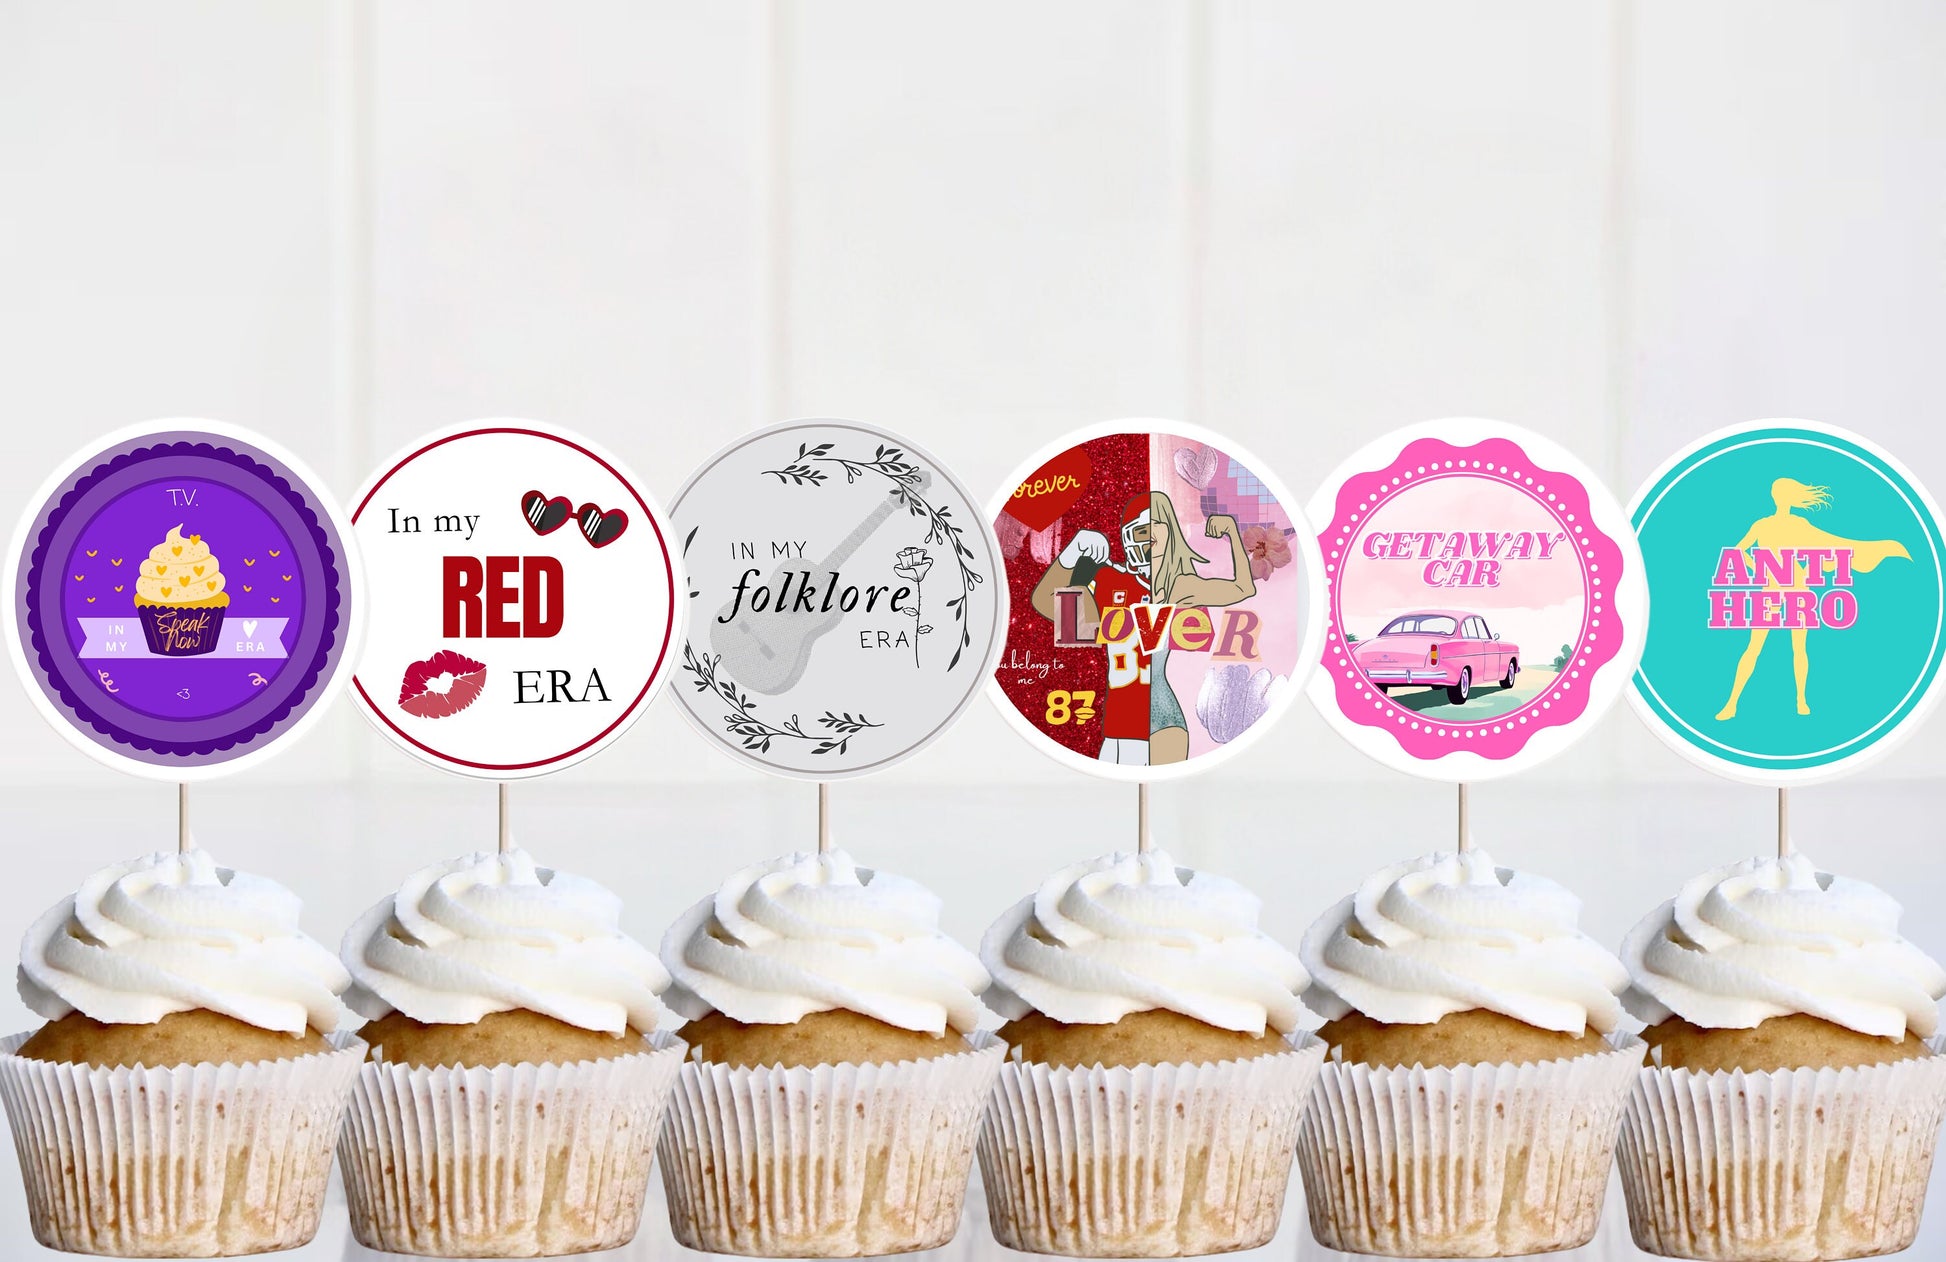 Swiftie birthday or party kit: 30 eras tour cupcake toppers, DIY print cut, gift for taylor swift fan, birthday taylor swift